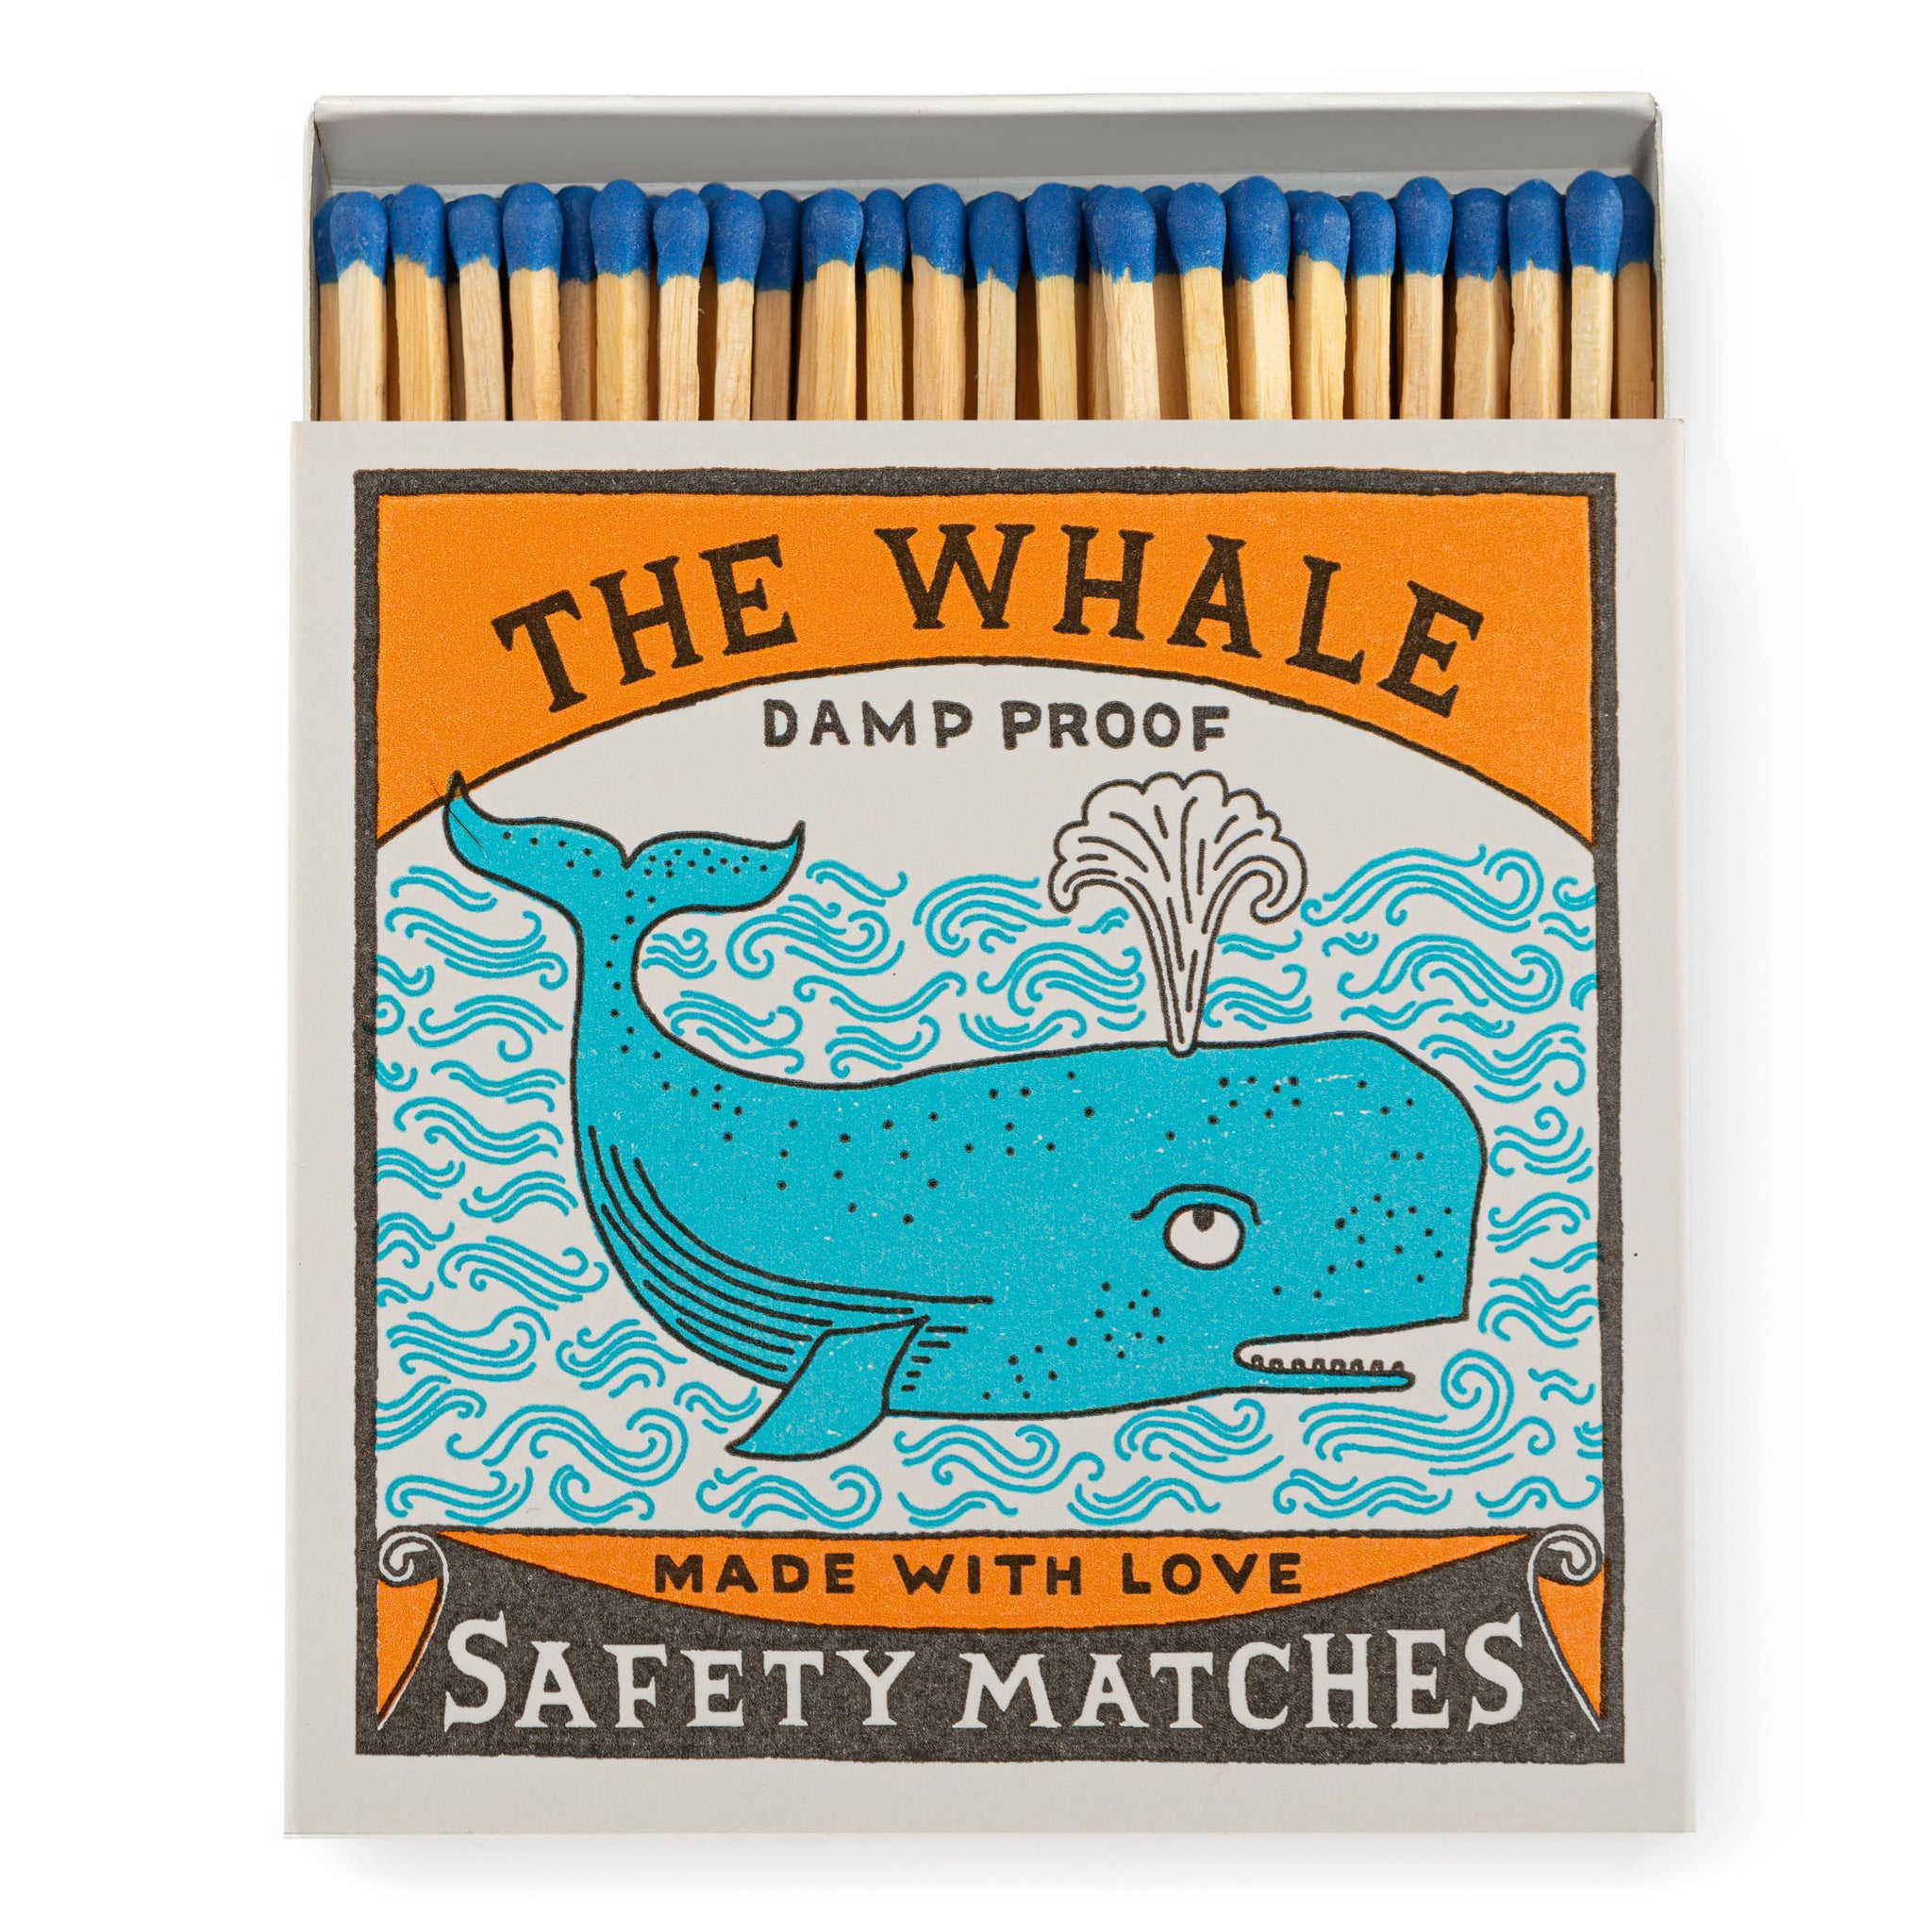 Archivist Gallery Matches - The Whale